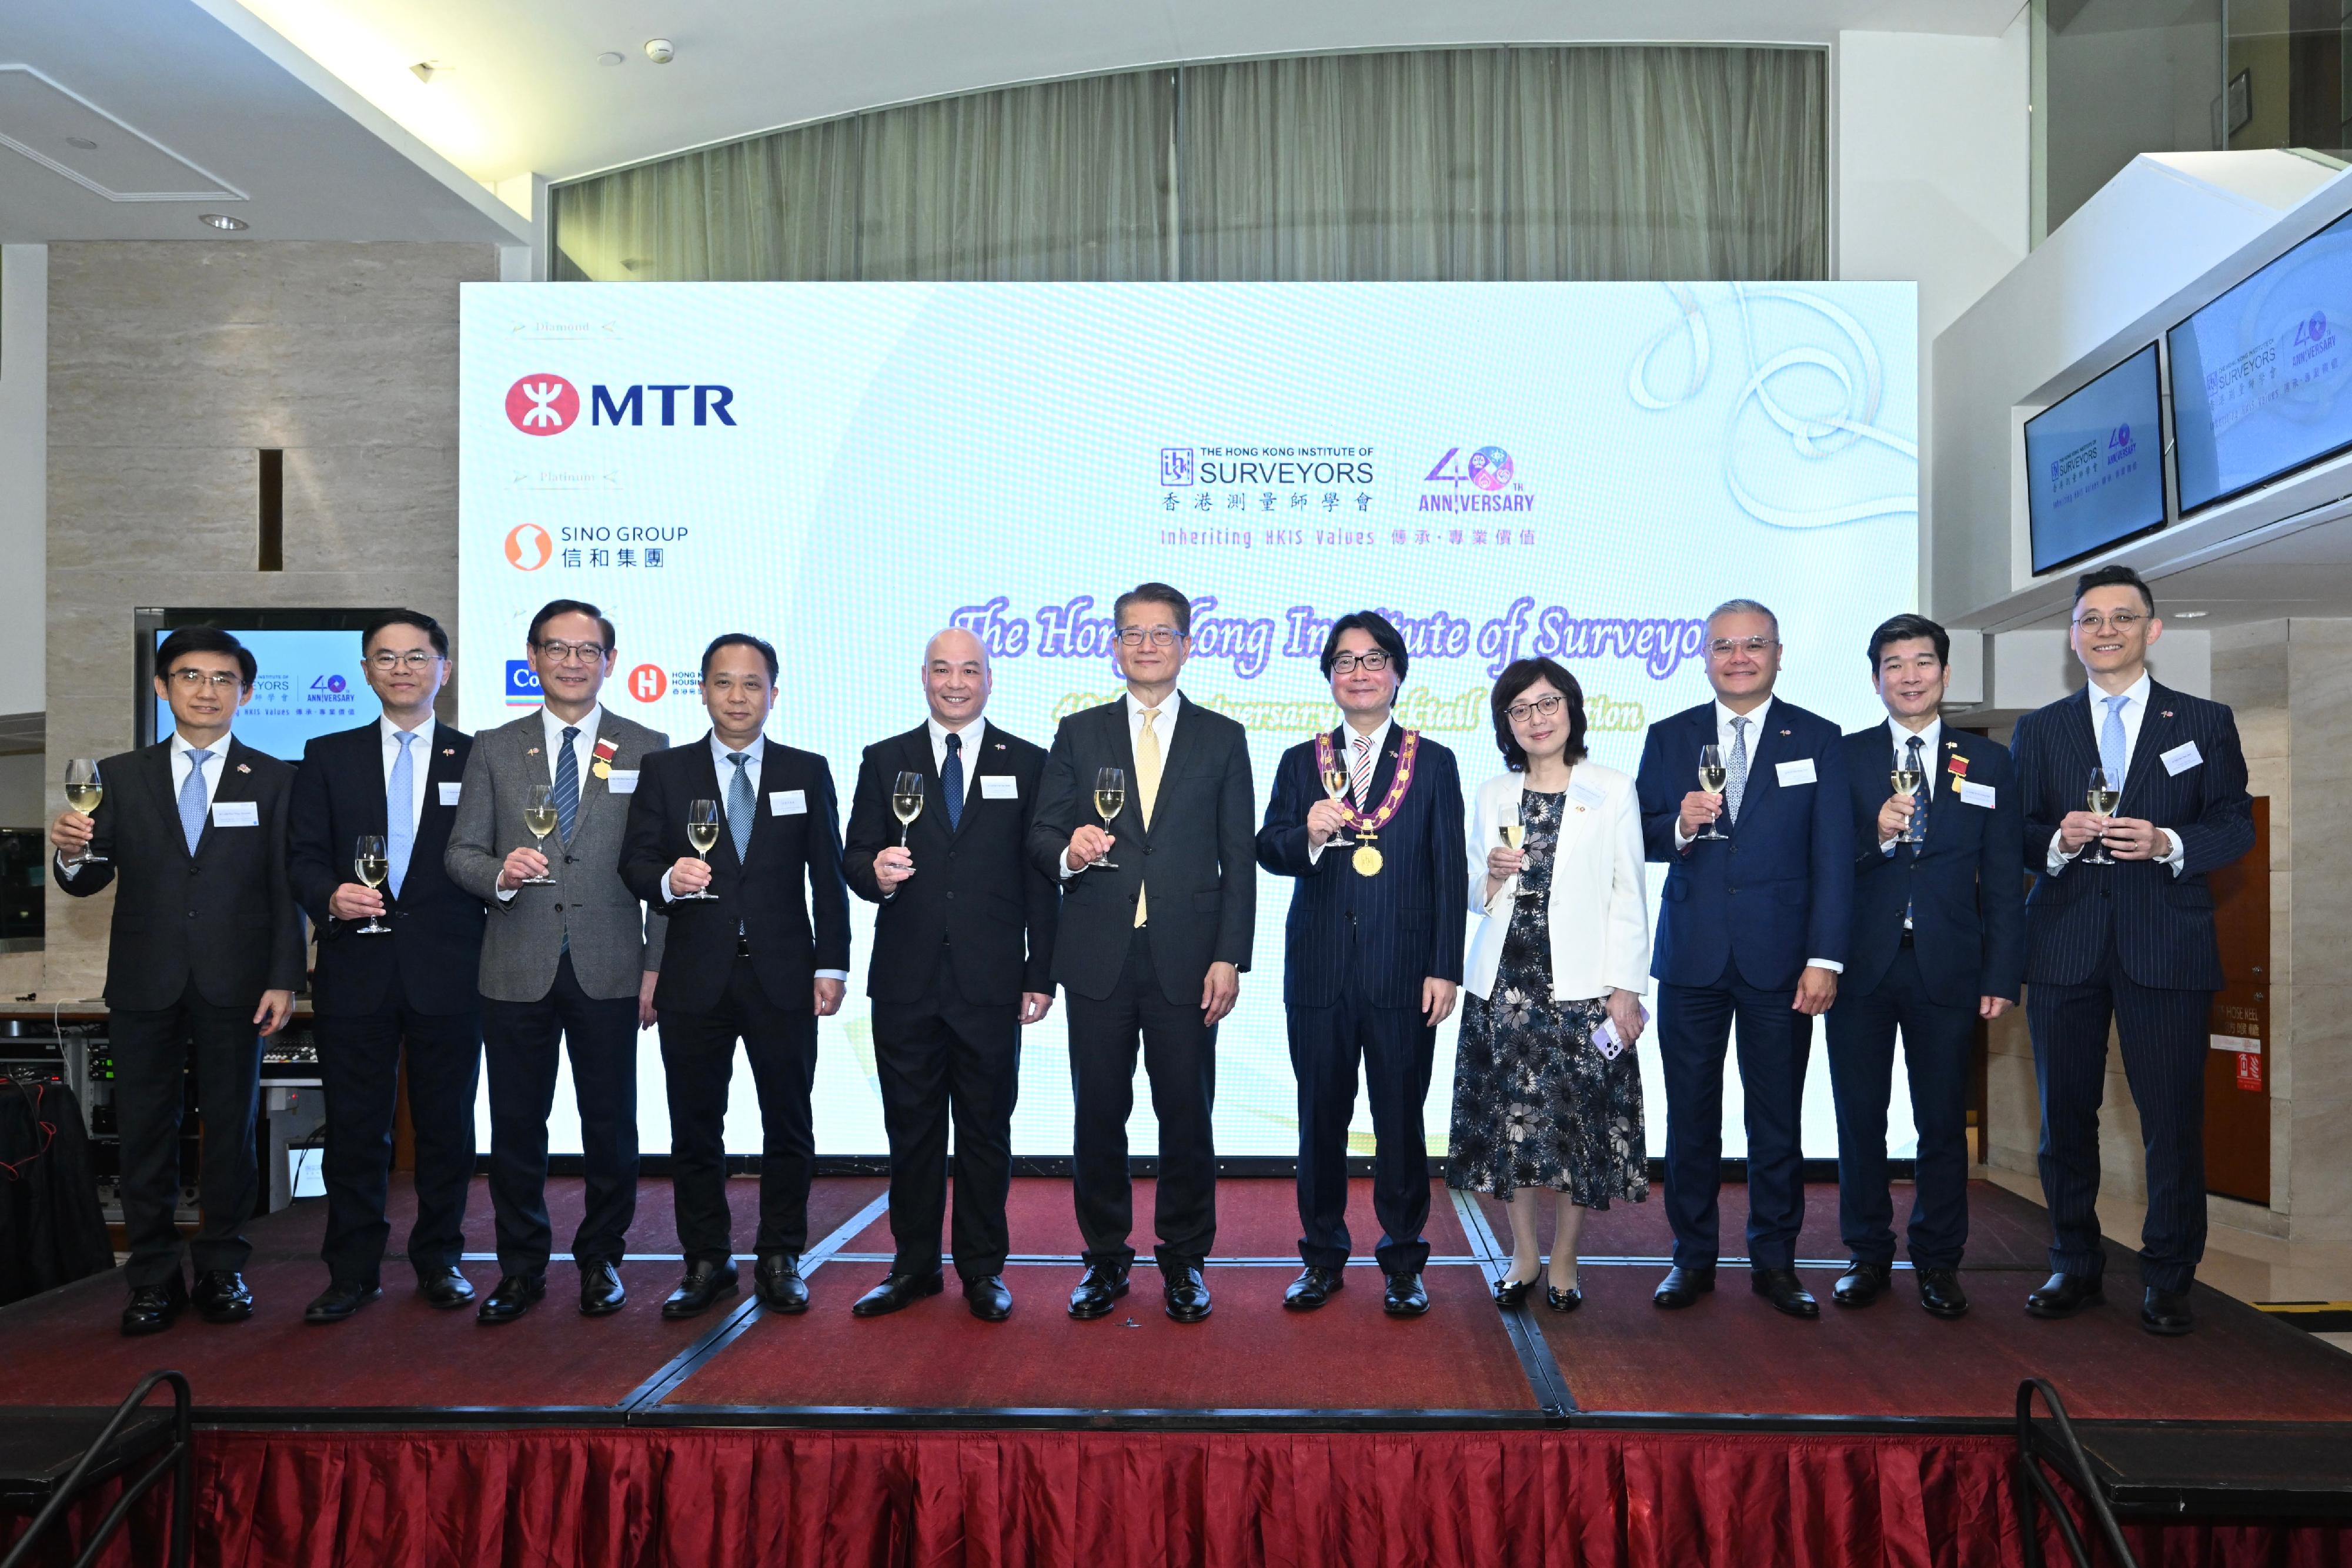 The Financial Secretary, Mr Paul Chan, attended the Hong Kong Institute of Surveyors (HKIS) 40th Anniversary Cocktail Reception today (March 22). Photo show Mr Chan (centre); the Secretary for Development, Ms Bernadette Linn (fourth right); the President of the HKIS, Mr Francis Lam (fifth right); and other guests giving a toast.